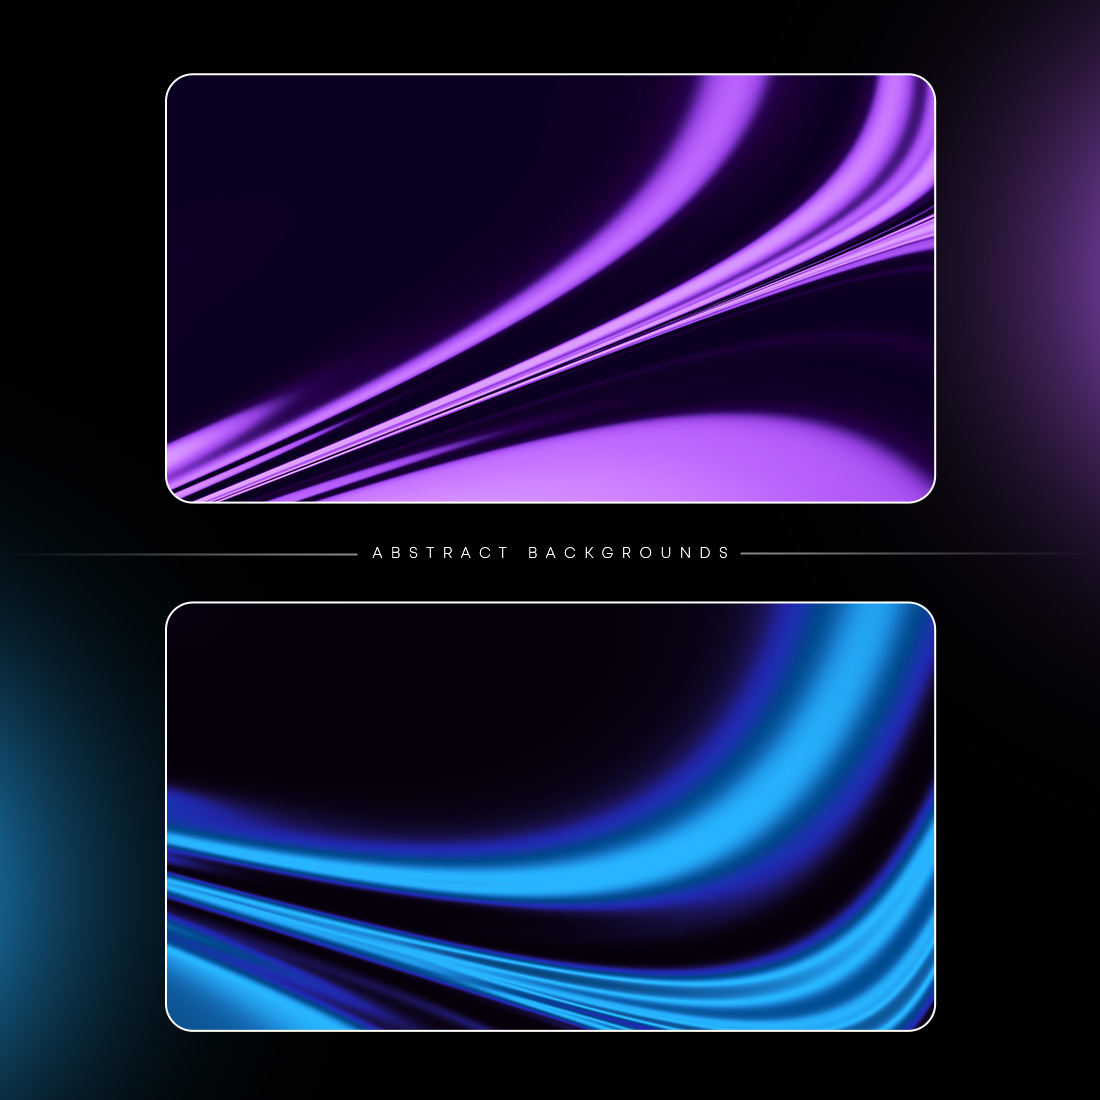 4 Abstract backrounds (4K) High resolution cover image.